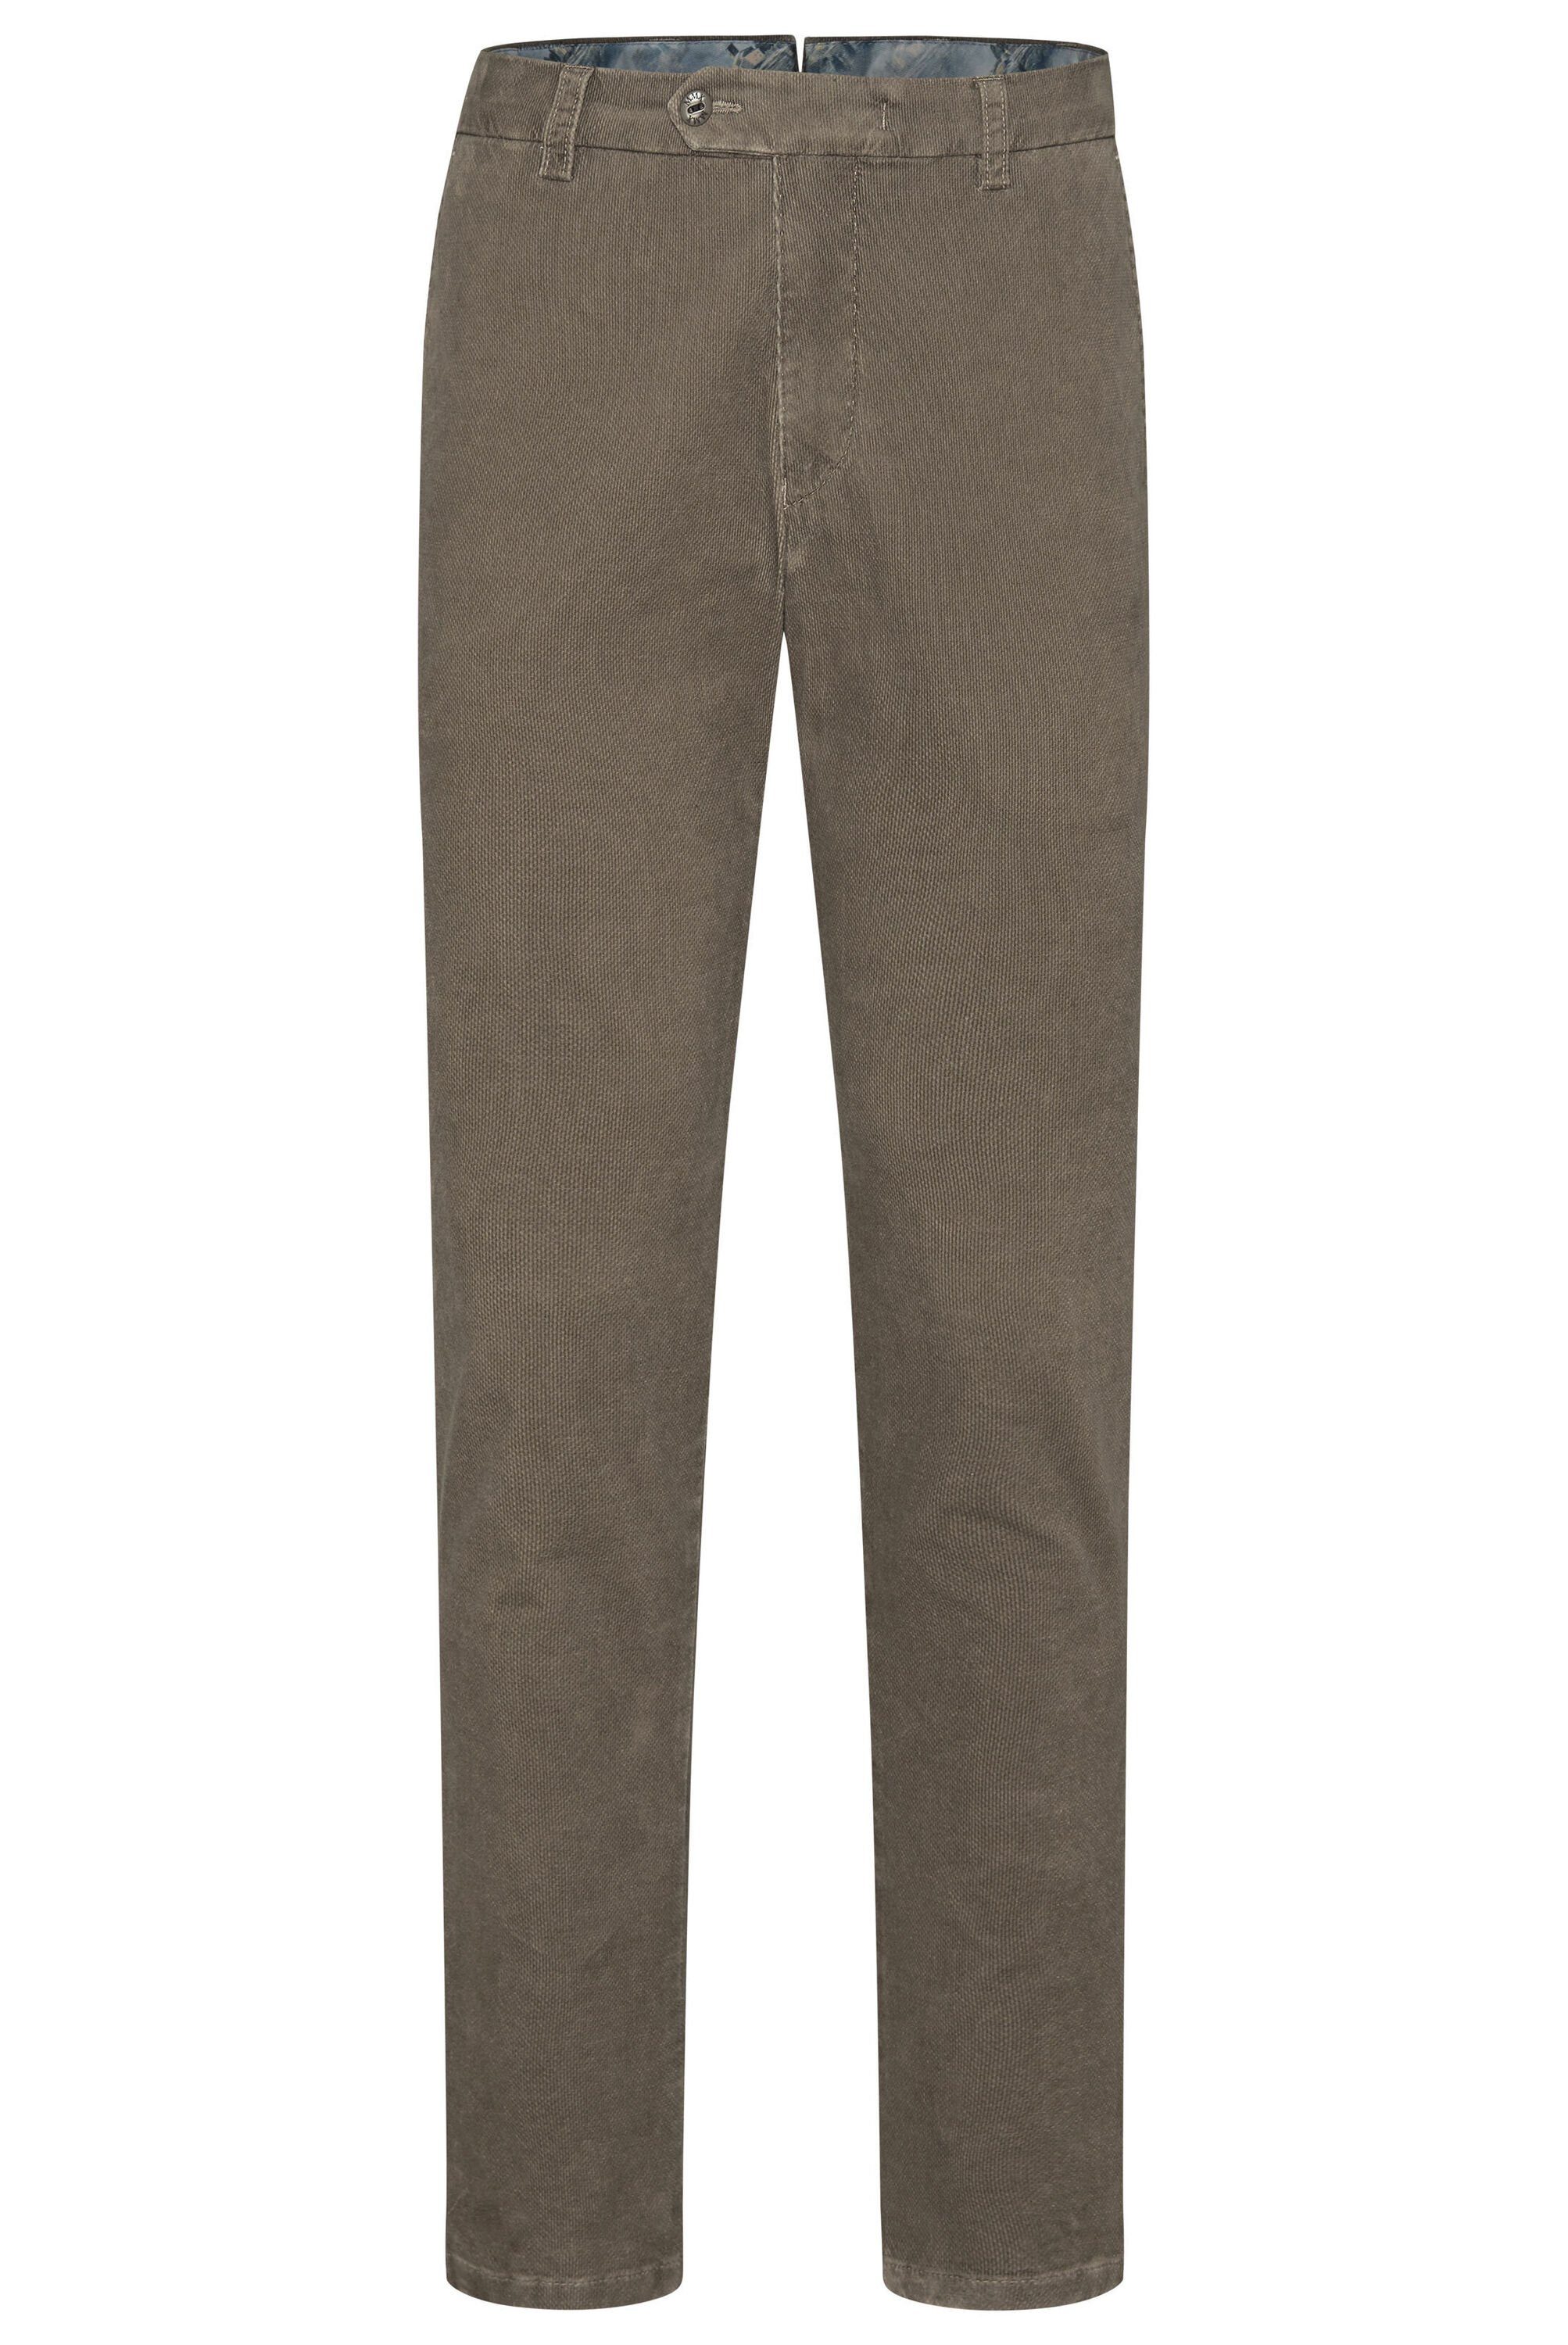 taupe schlanker MMX Silhouette Chinohose in